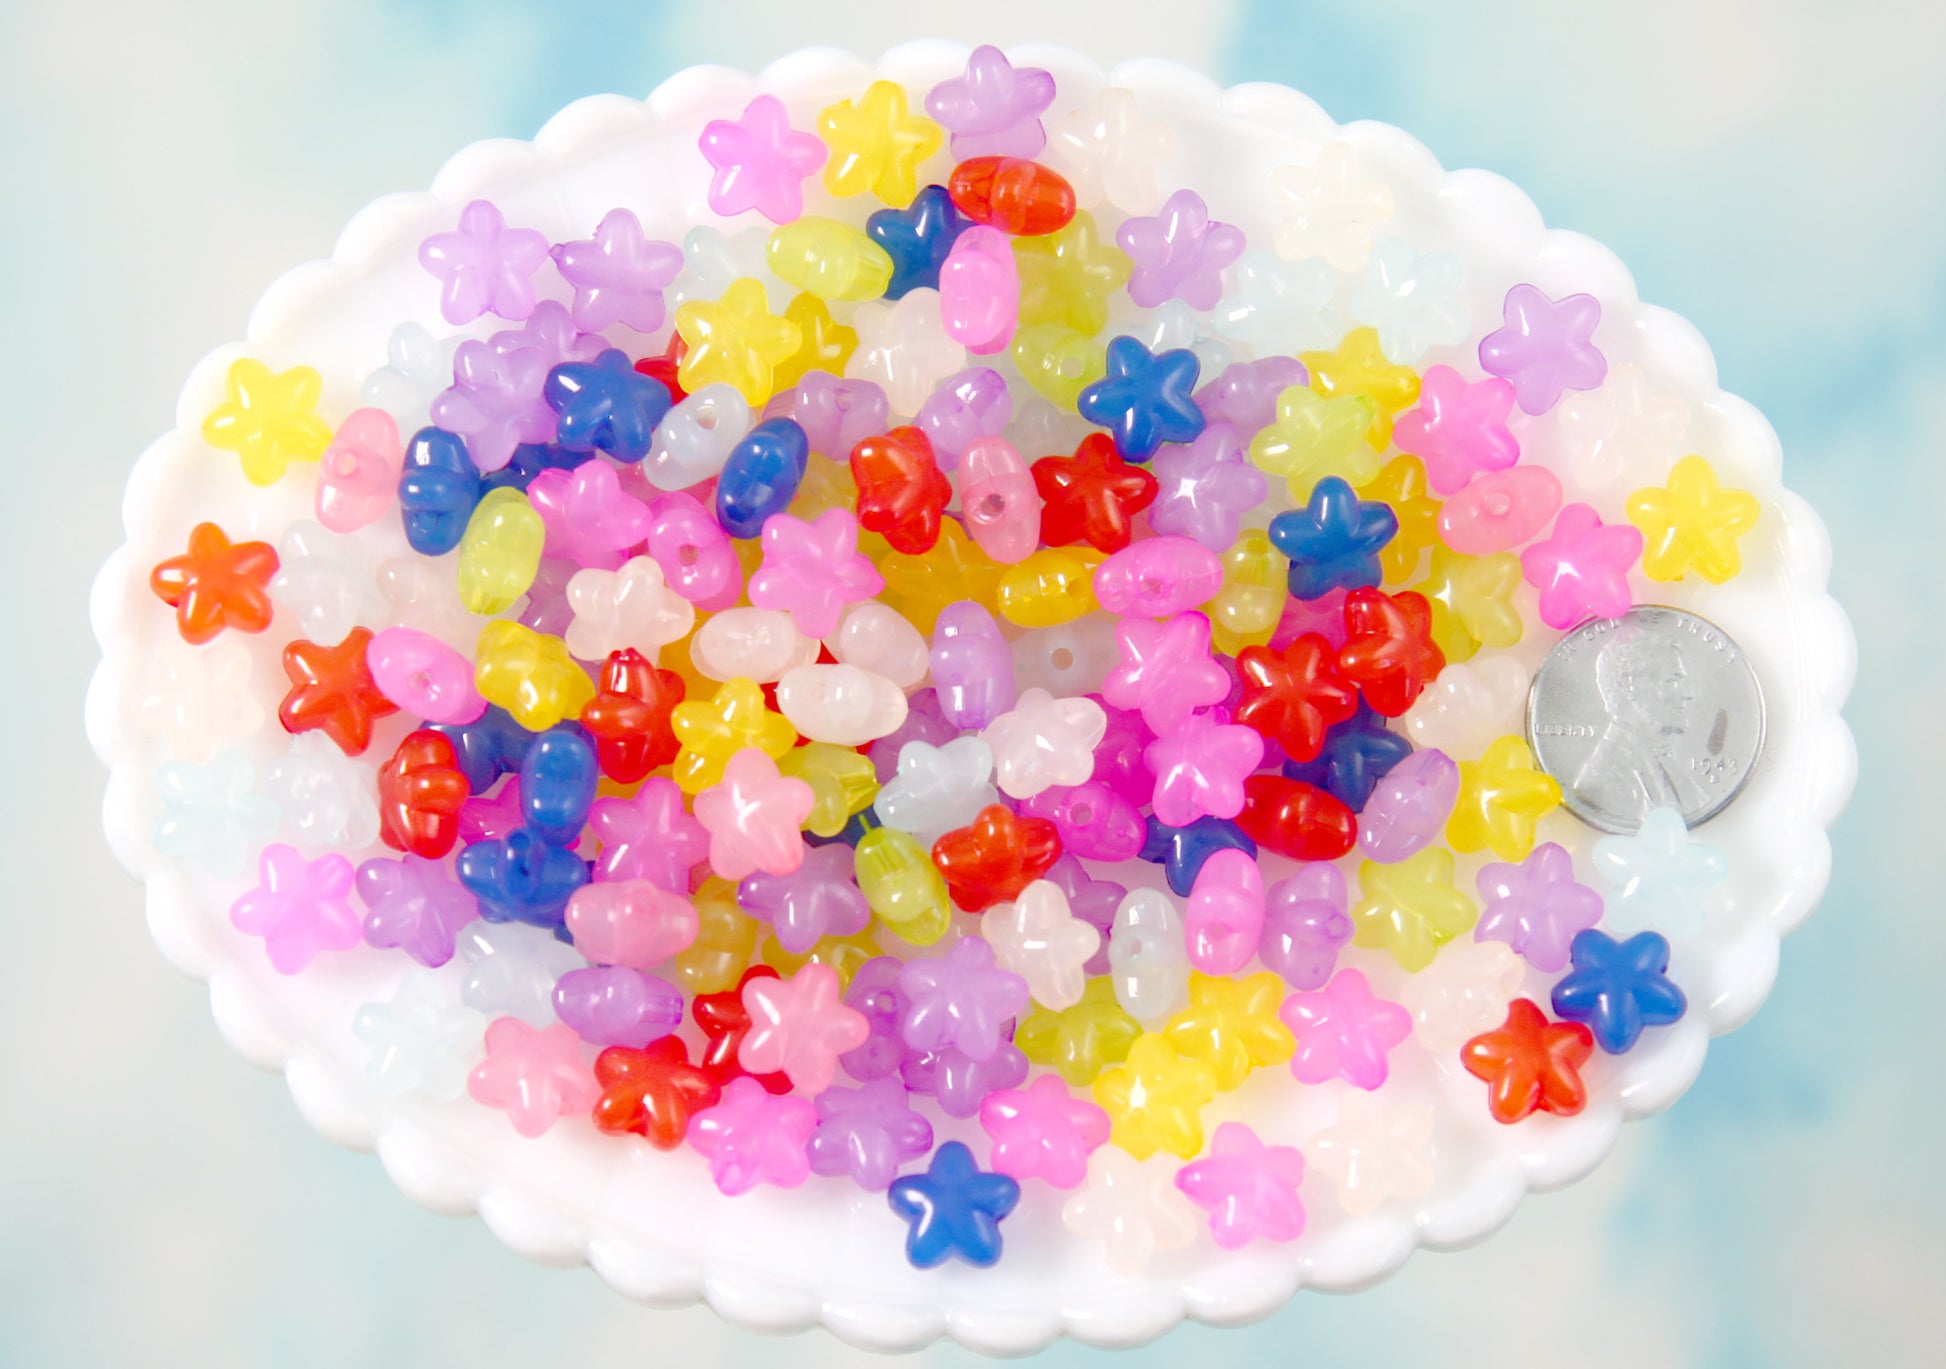 500pcs/lot 6mm 2 holes Round Resin Mini Tiny Buttons Sewing